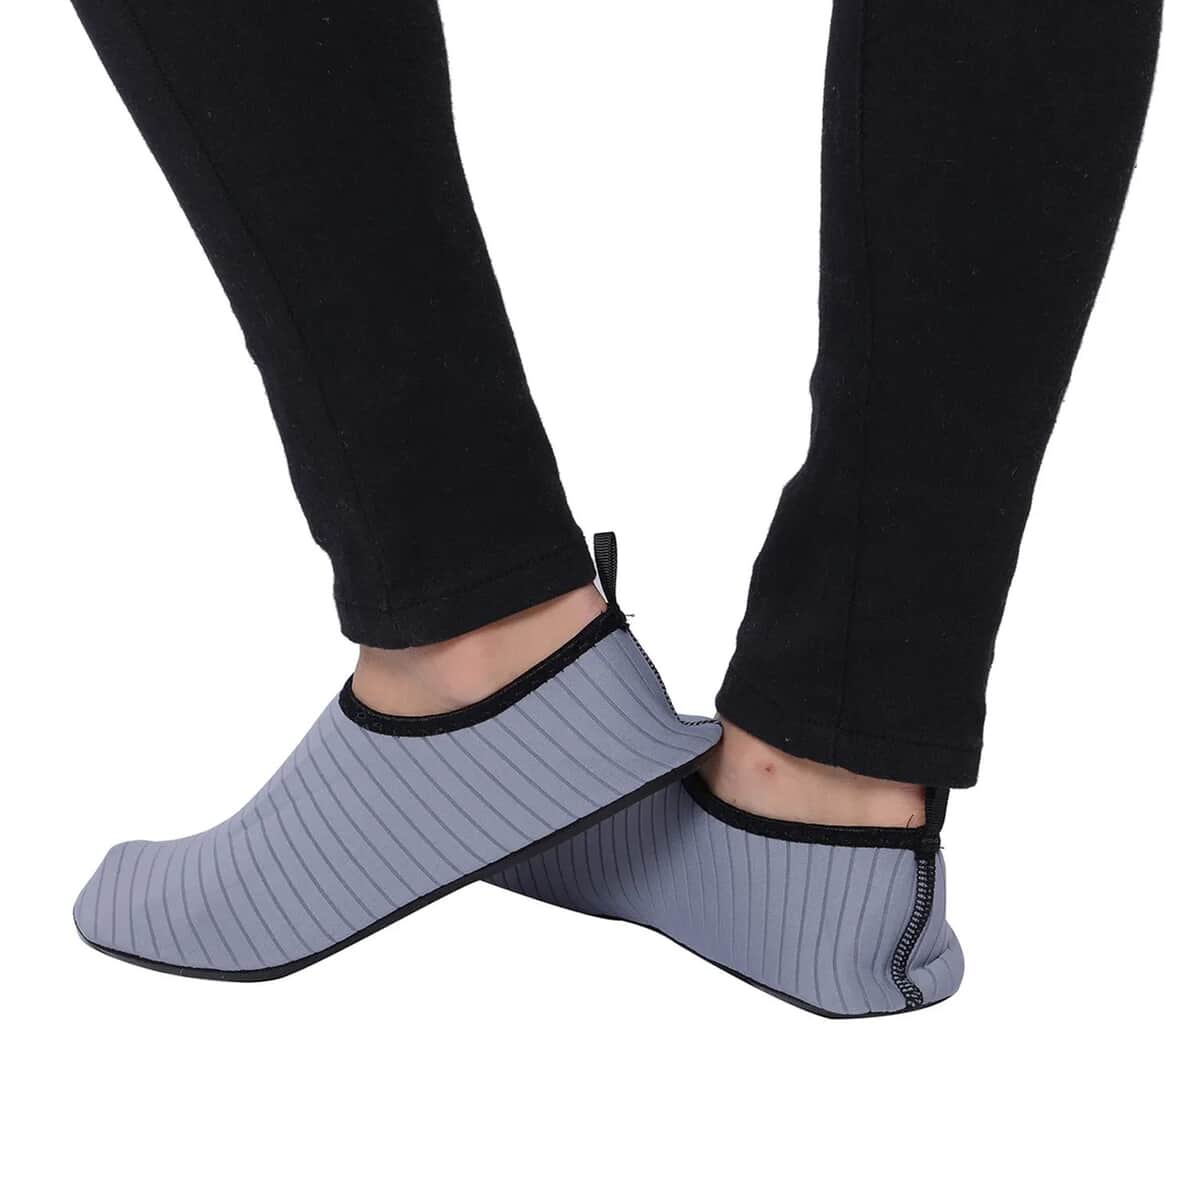 Gray Women's and Men's Water Shoes Barefoot Quick-Dry Aqua Socks (9-10) image number 3